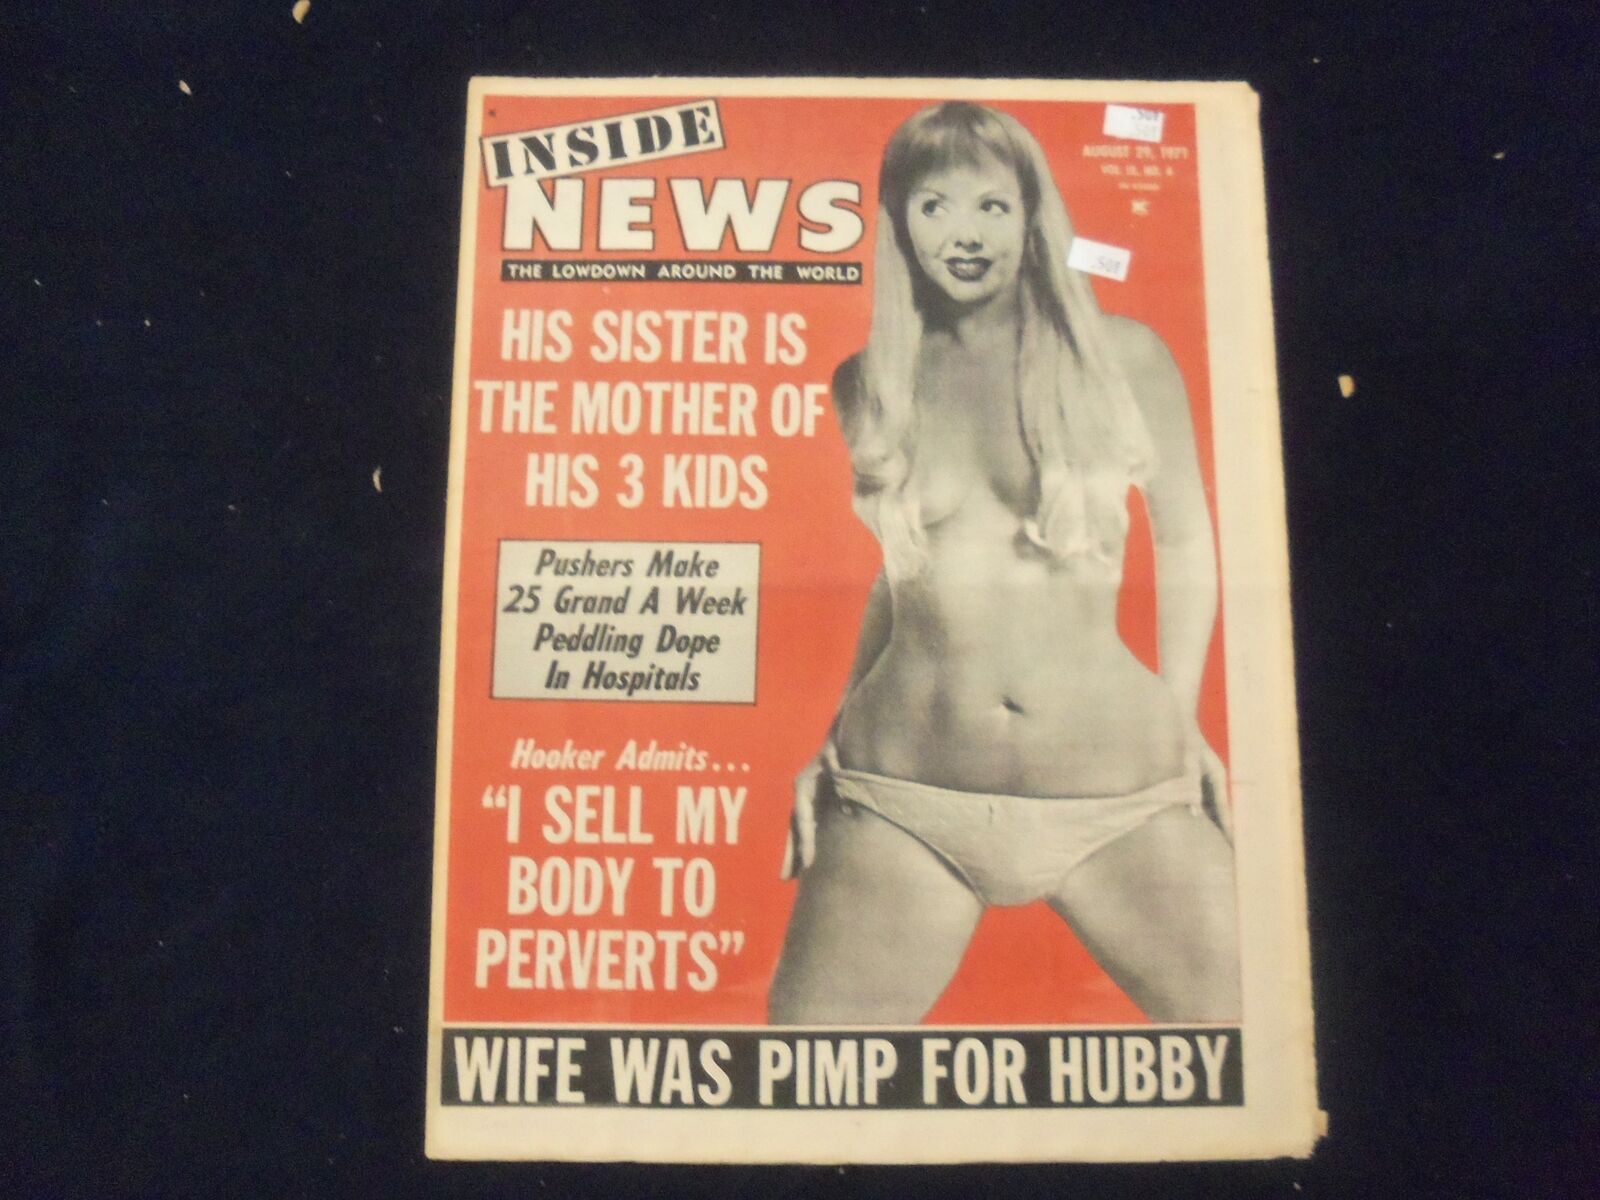 1971 AUGUST 29 INSIDE NEWS NEWSPAPER - SISTER IS MOTHER OF HIS 3 KIDS - NP 7296